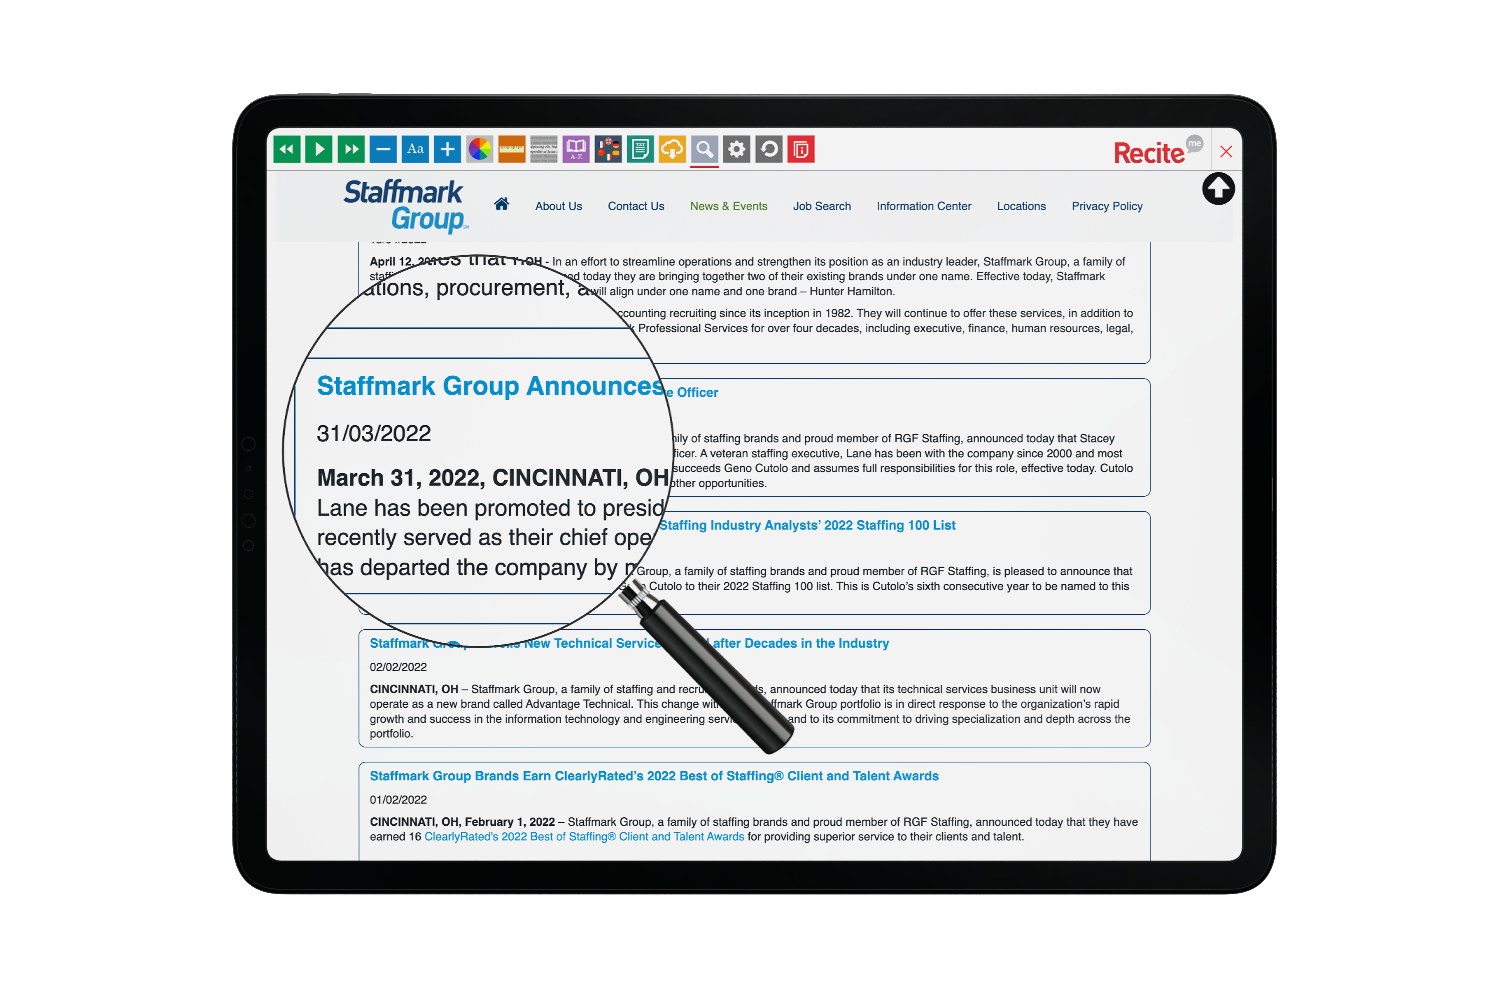 Tablet with Staffmark Group website using the Recite Me assistive toolbar